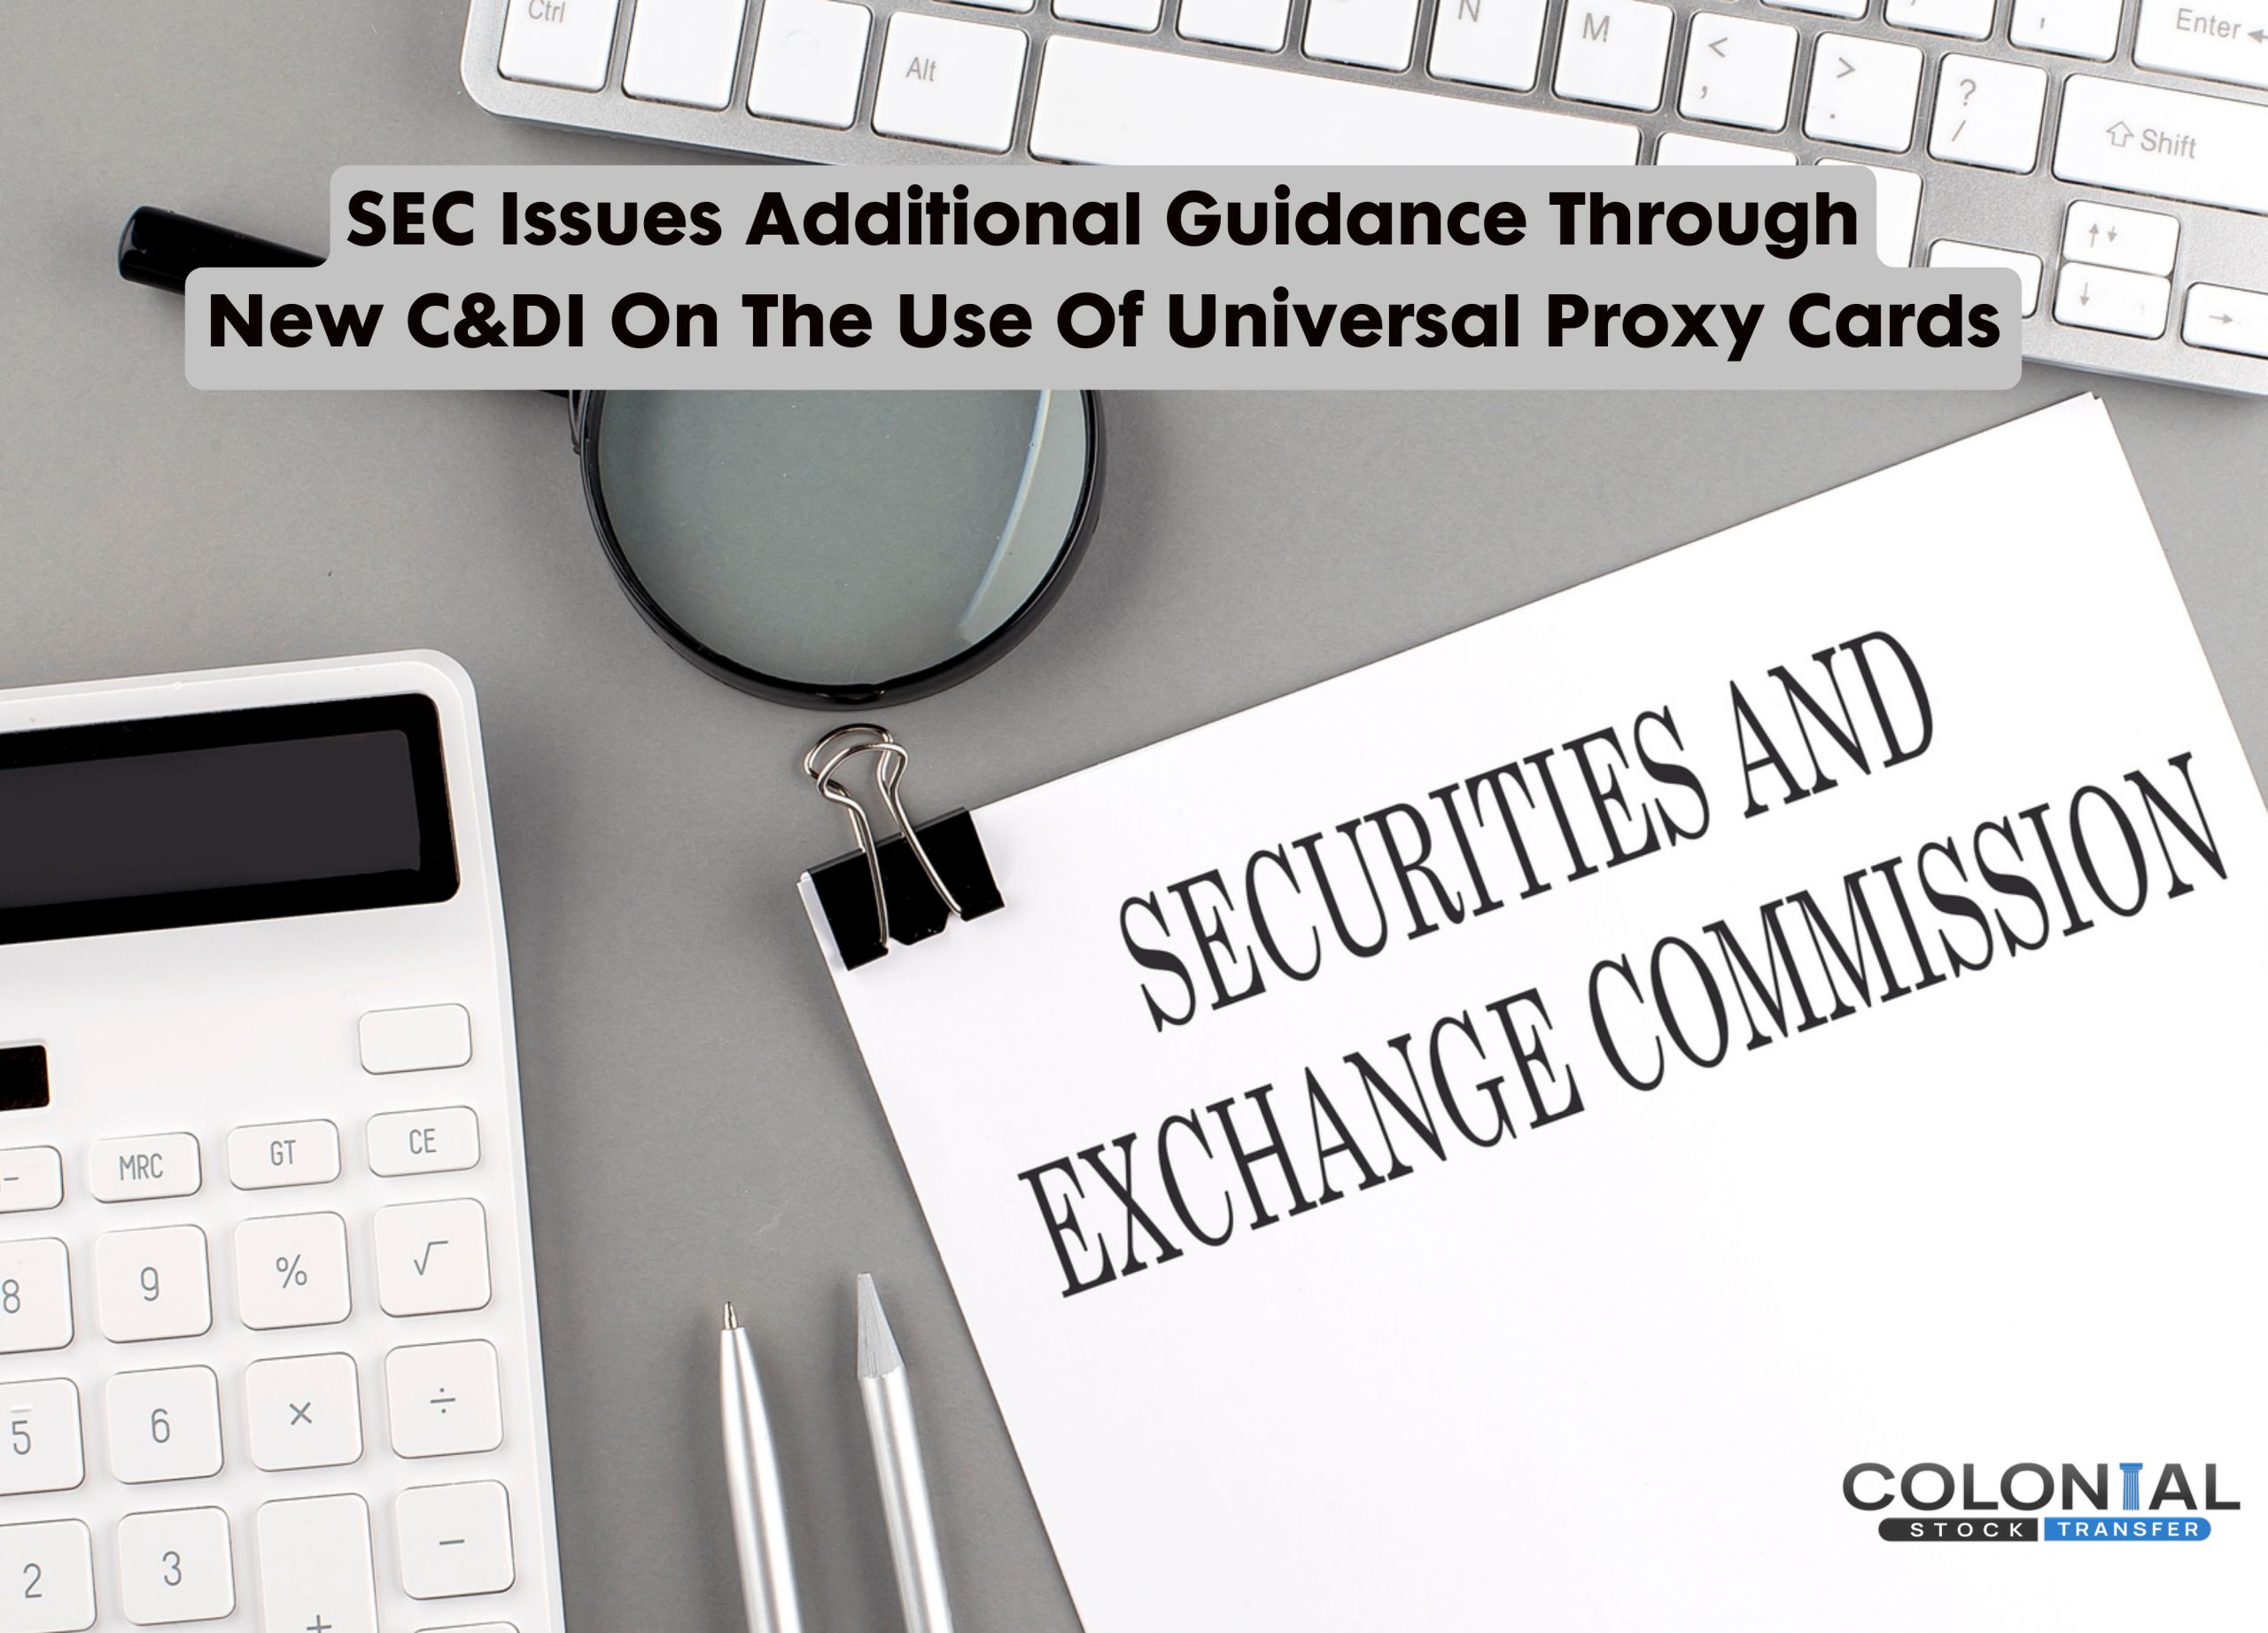 SEC Issues Additional Guidance Through New C&DI On The Use Of Universal Proxy Cards